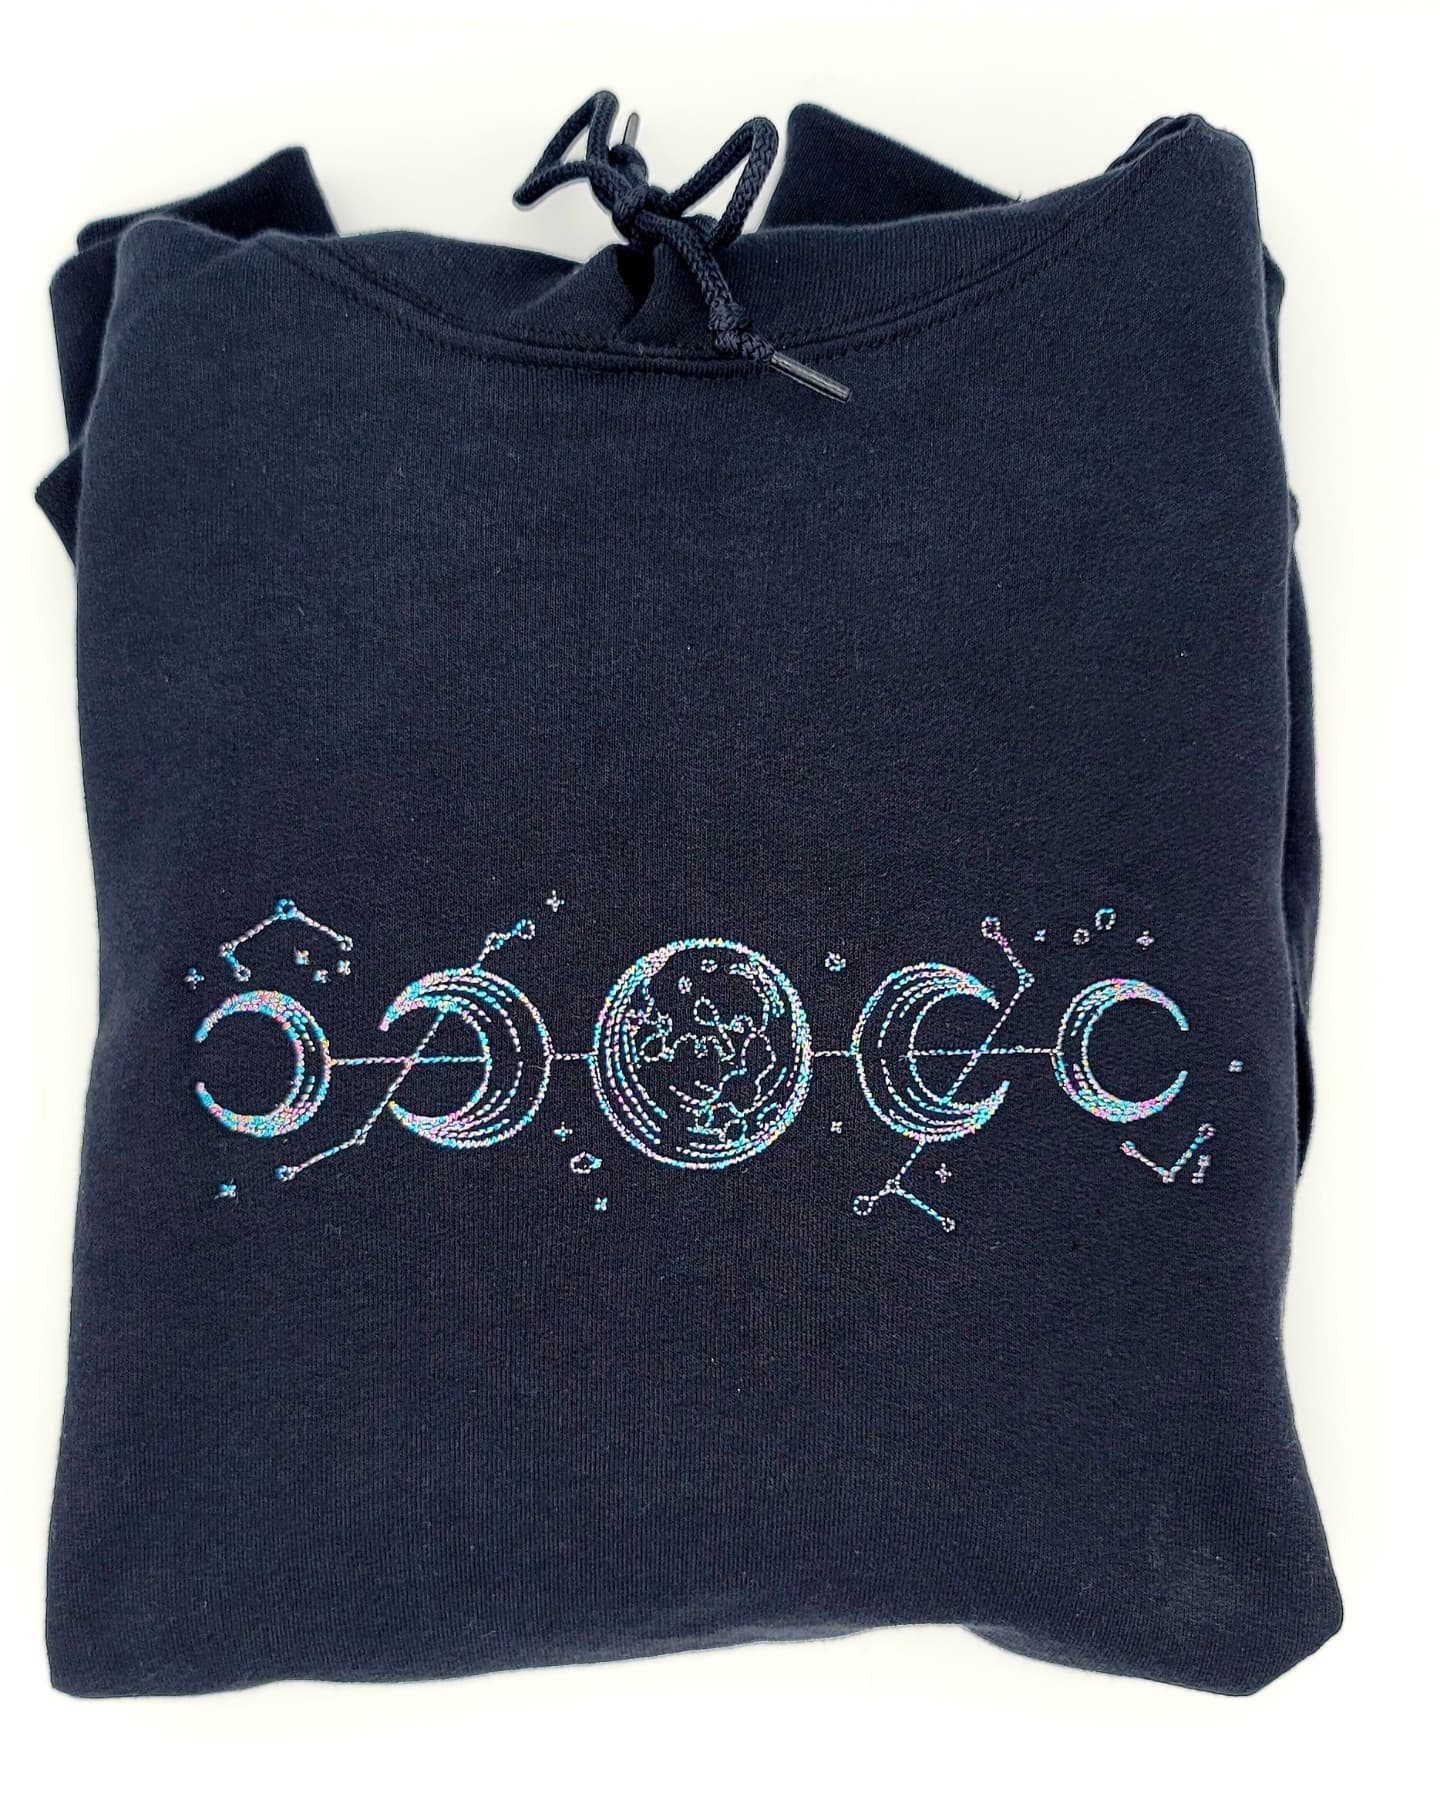 Embroidered Moon Phases Hoodie